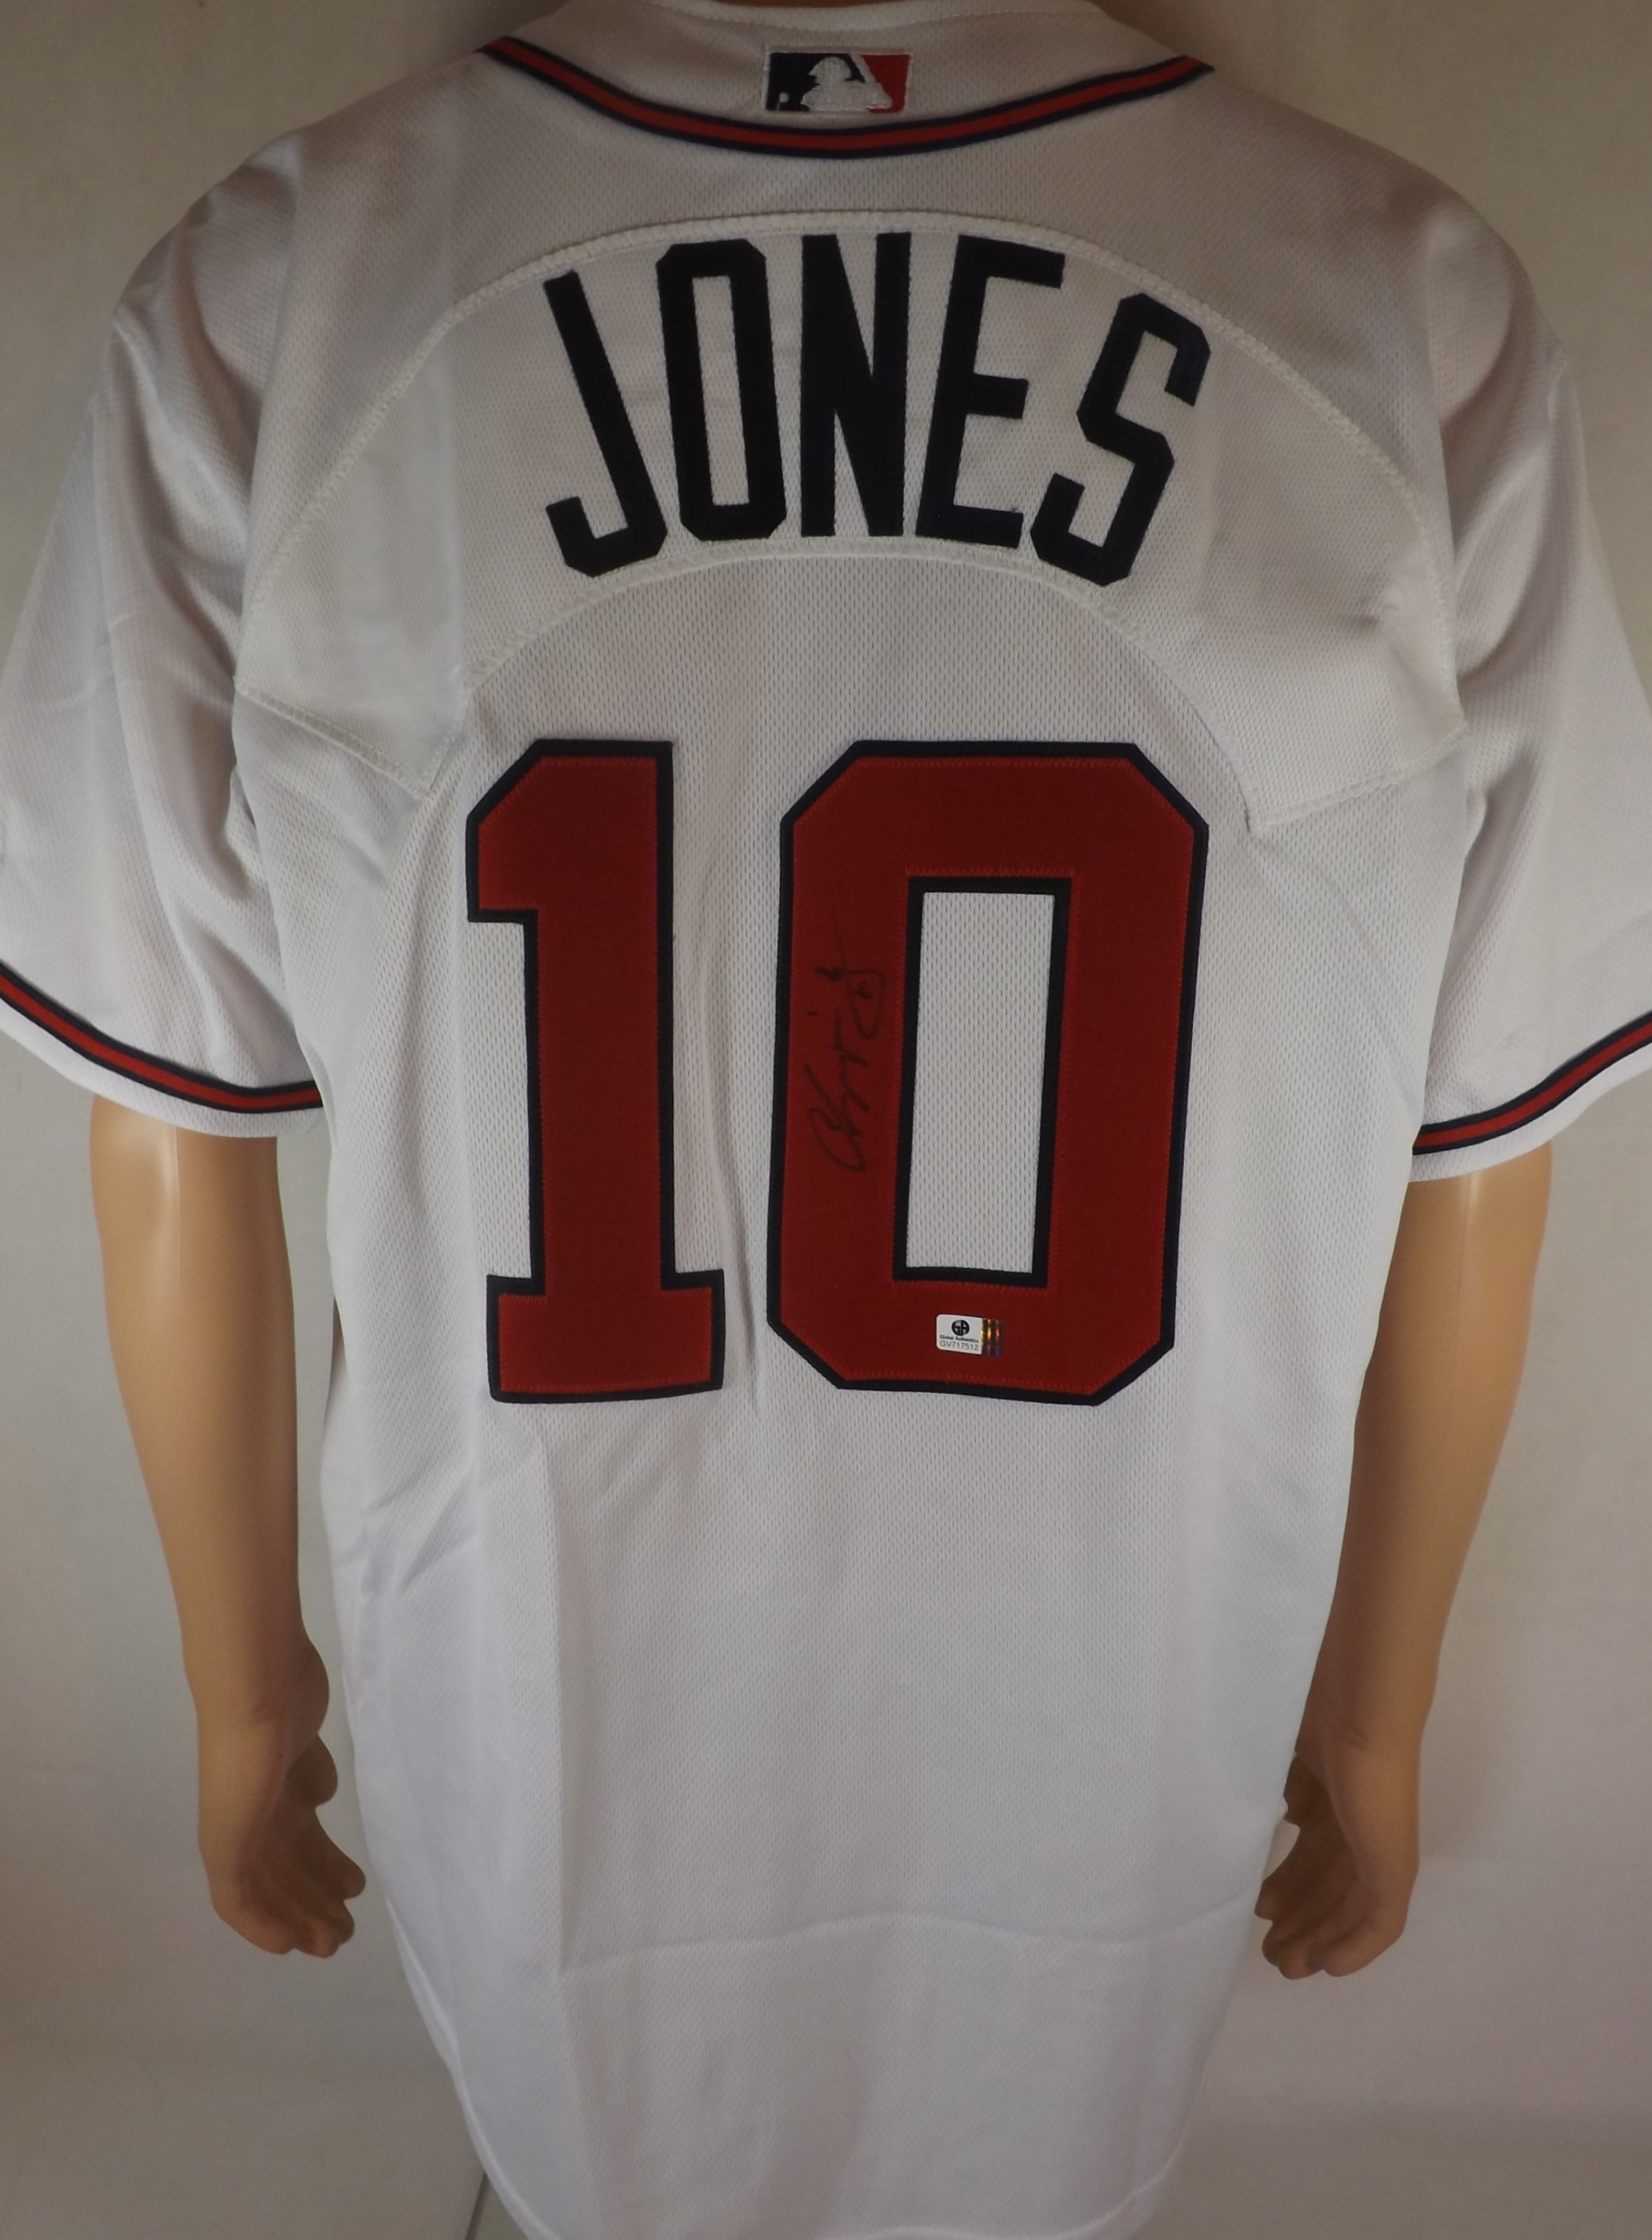 Chipper Jones MLB Authenticated Team Issued Los Bravos Jersey - Size 48